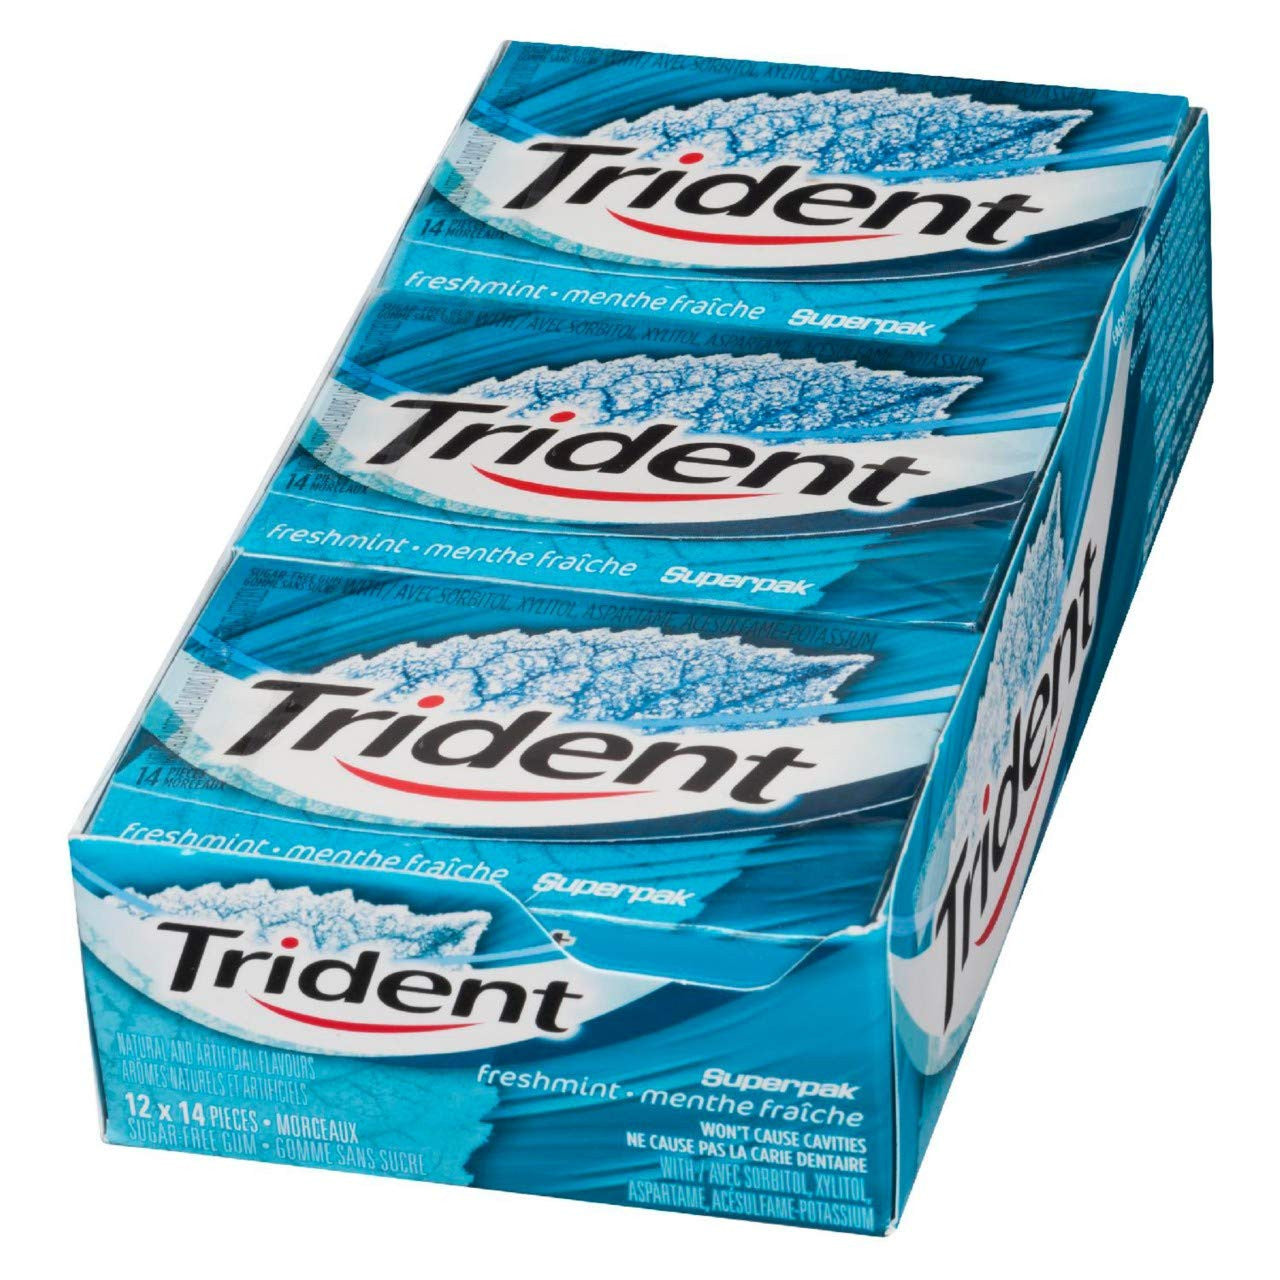 Trident Freshmint Chewing Gum, 12ct/14-Pieces/Pack, (Imported from Canada)